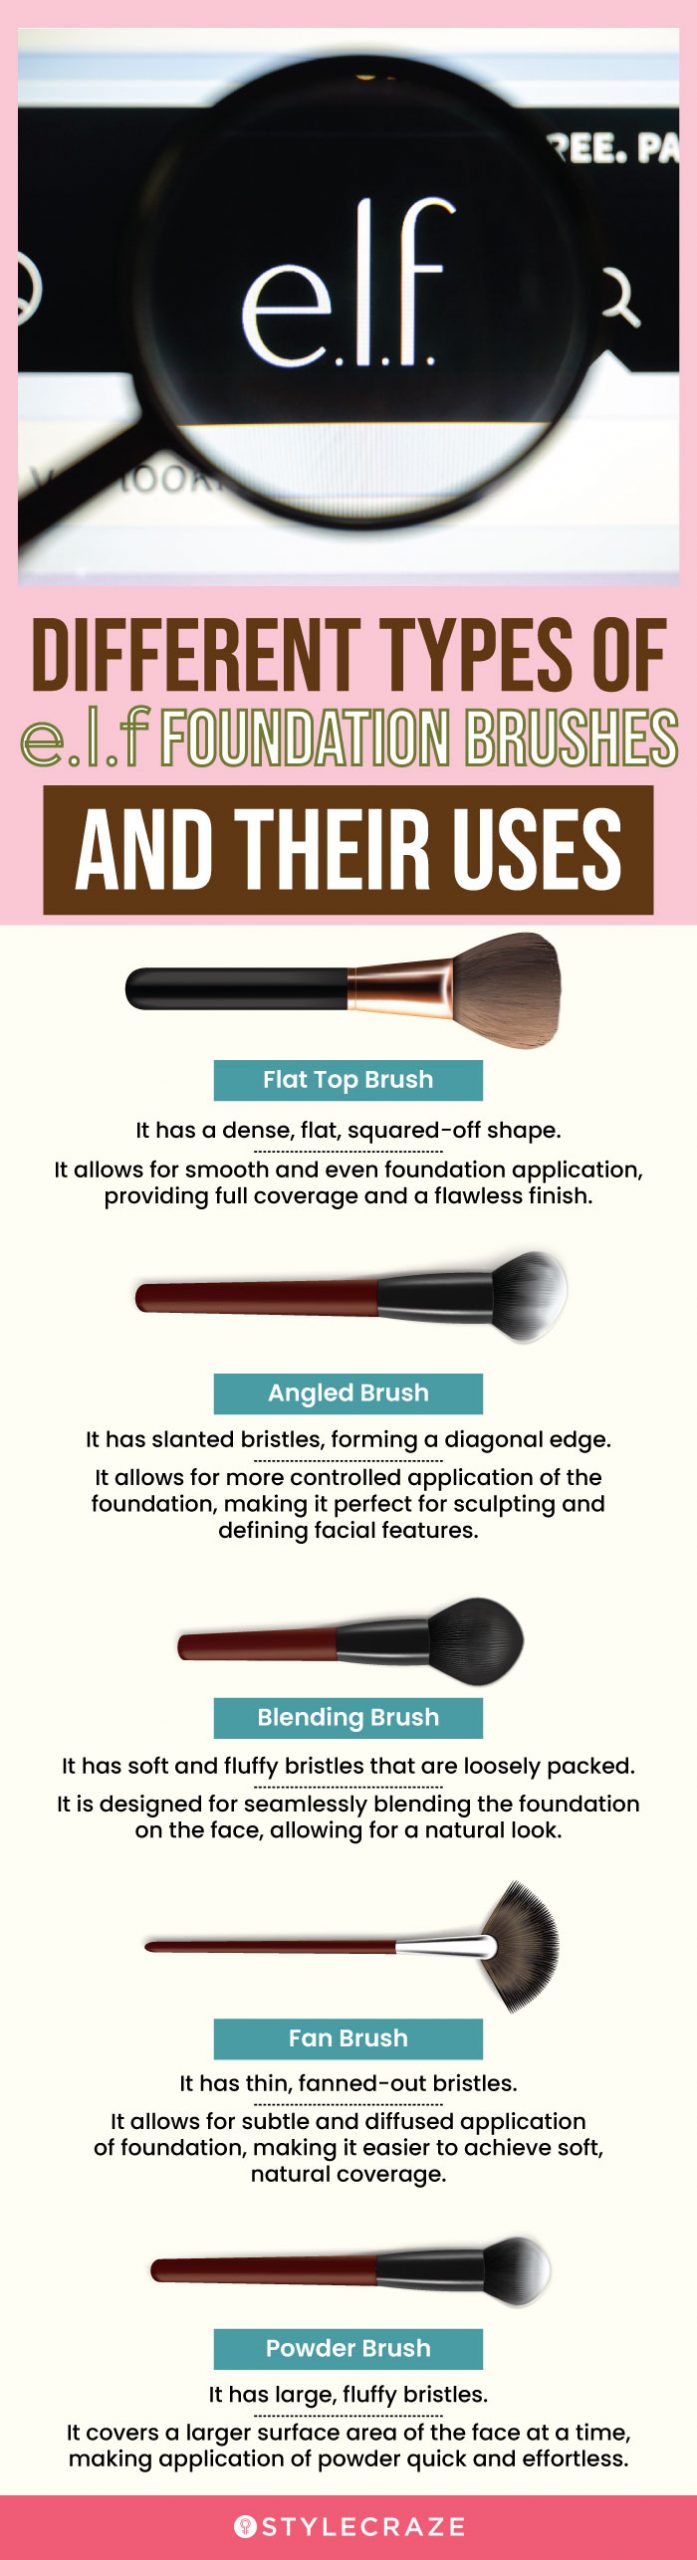 Different Types Of e.l.f Foundation Brushes (infographic)